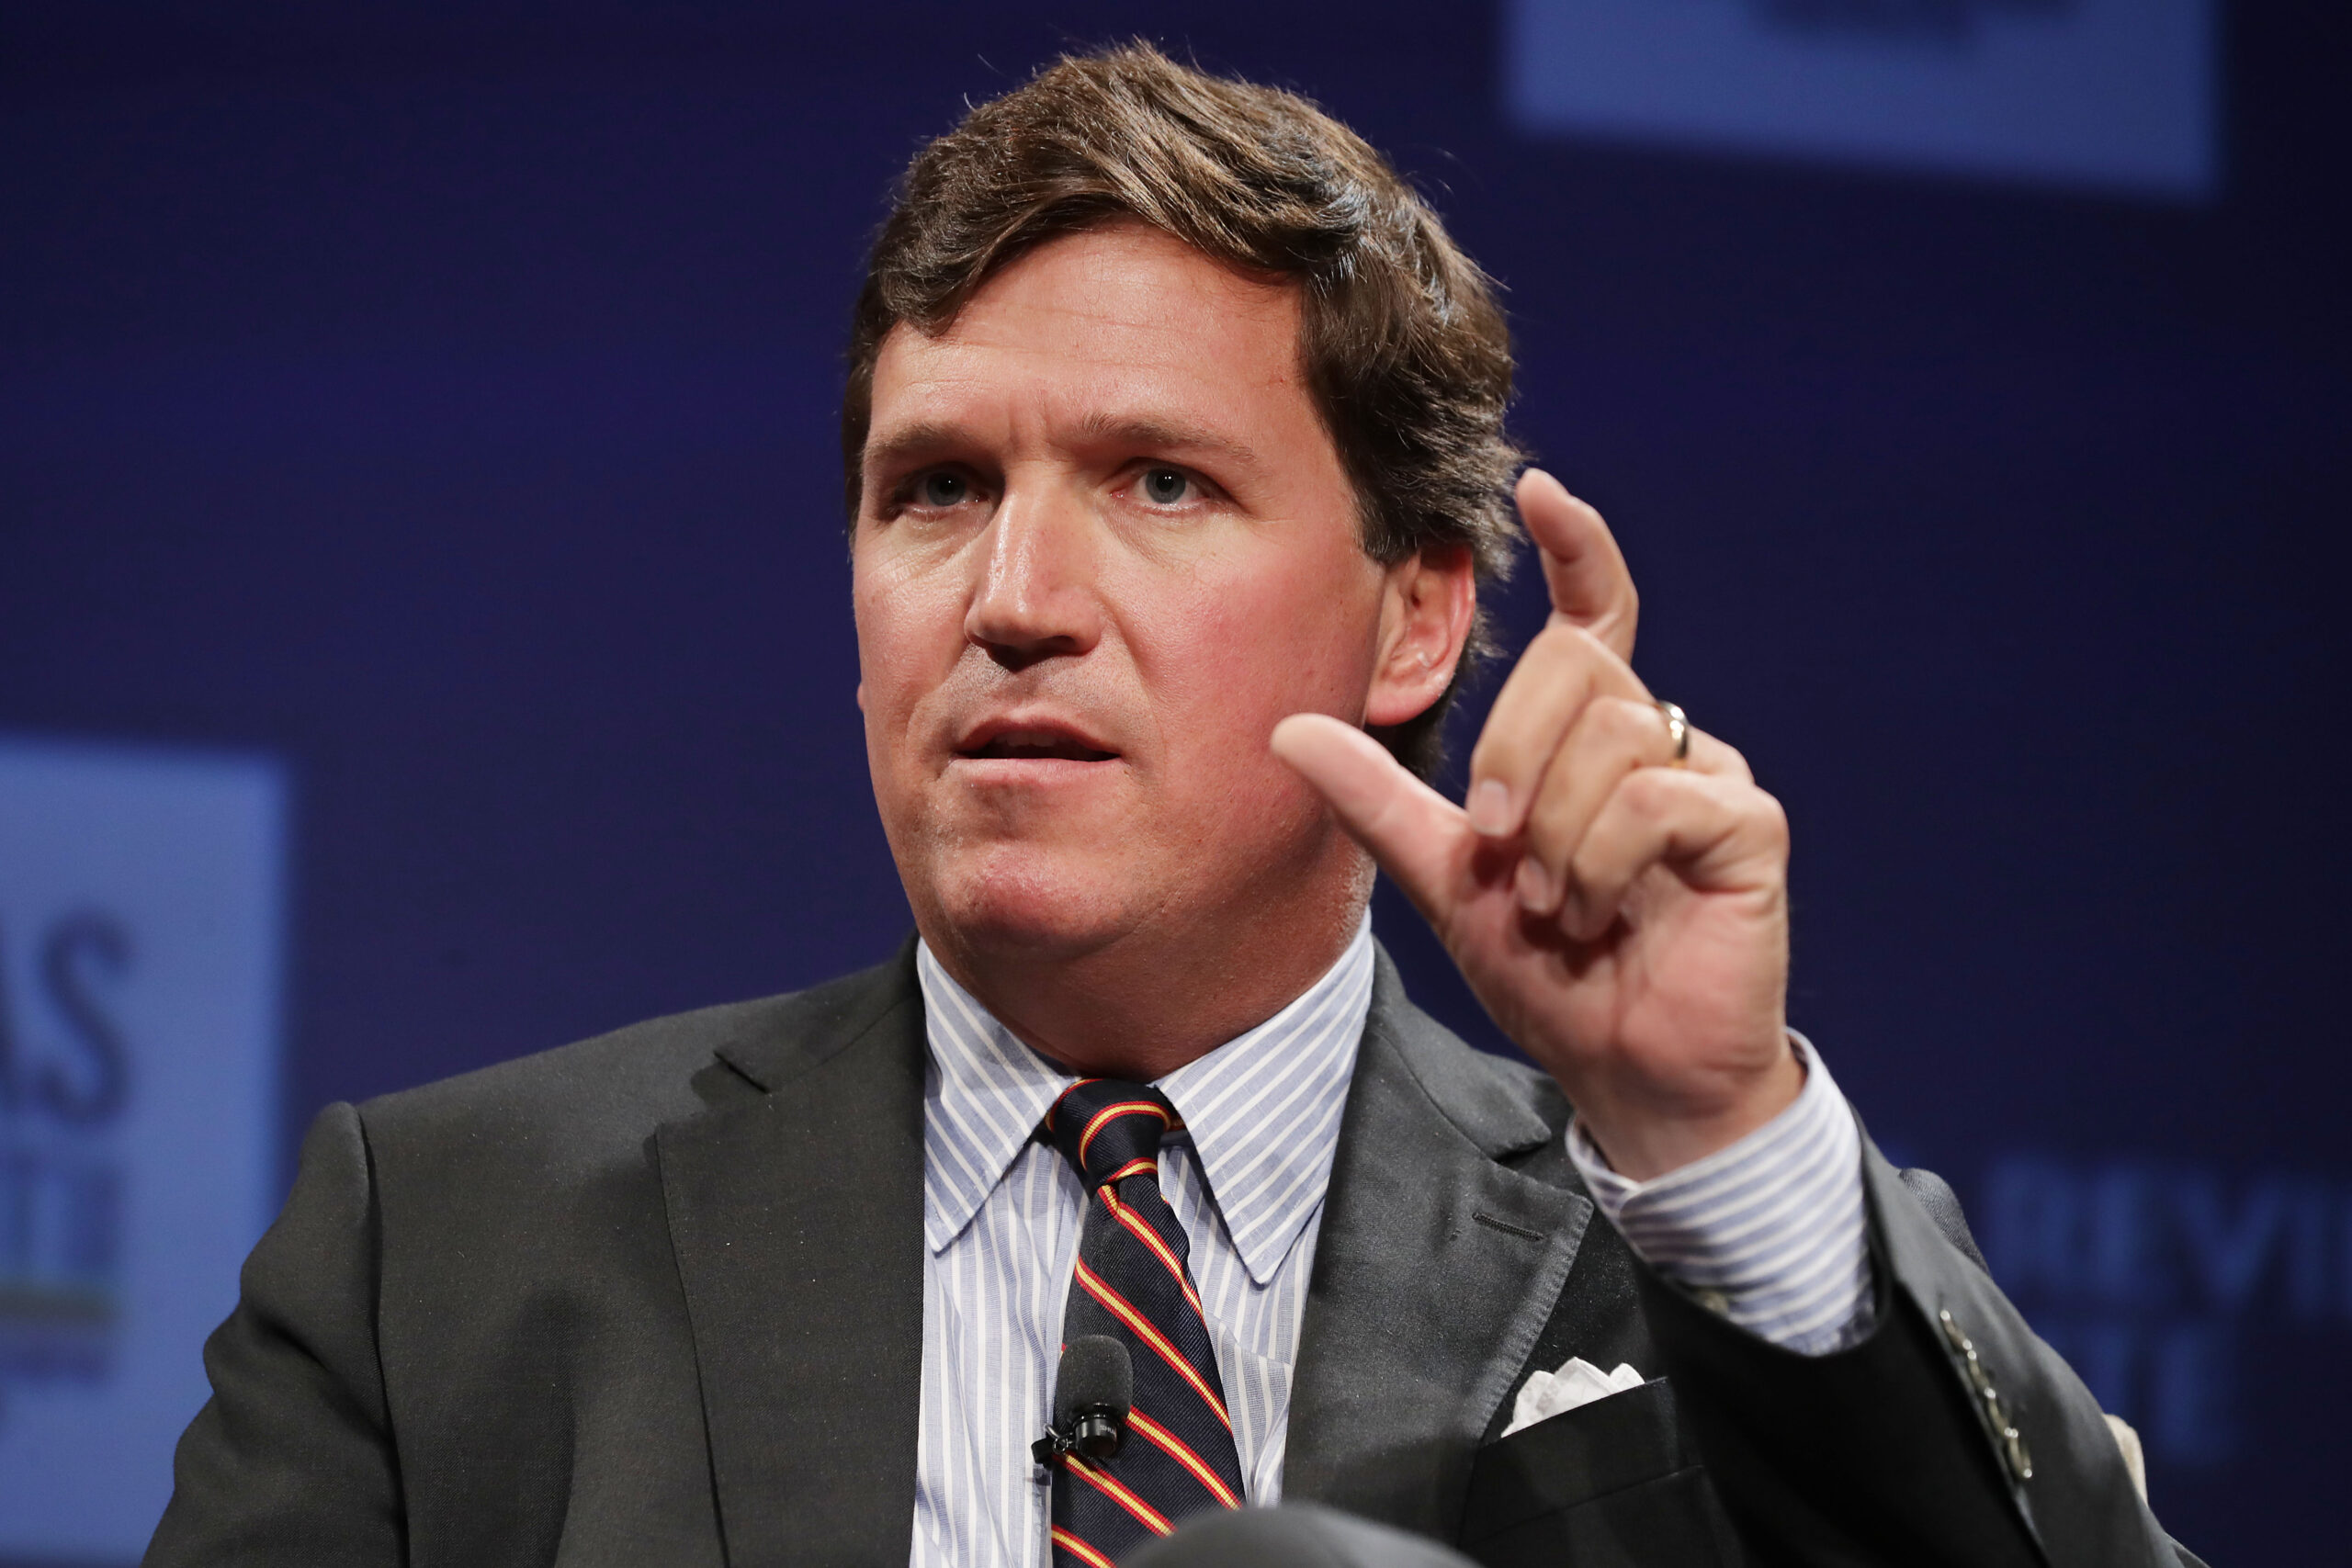 Tucker’s removal from Fox News explained by biographer.